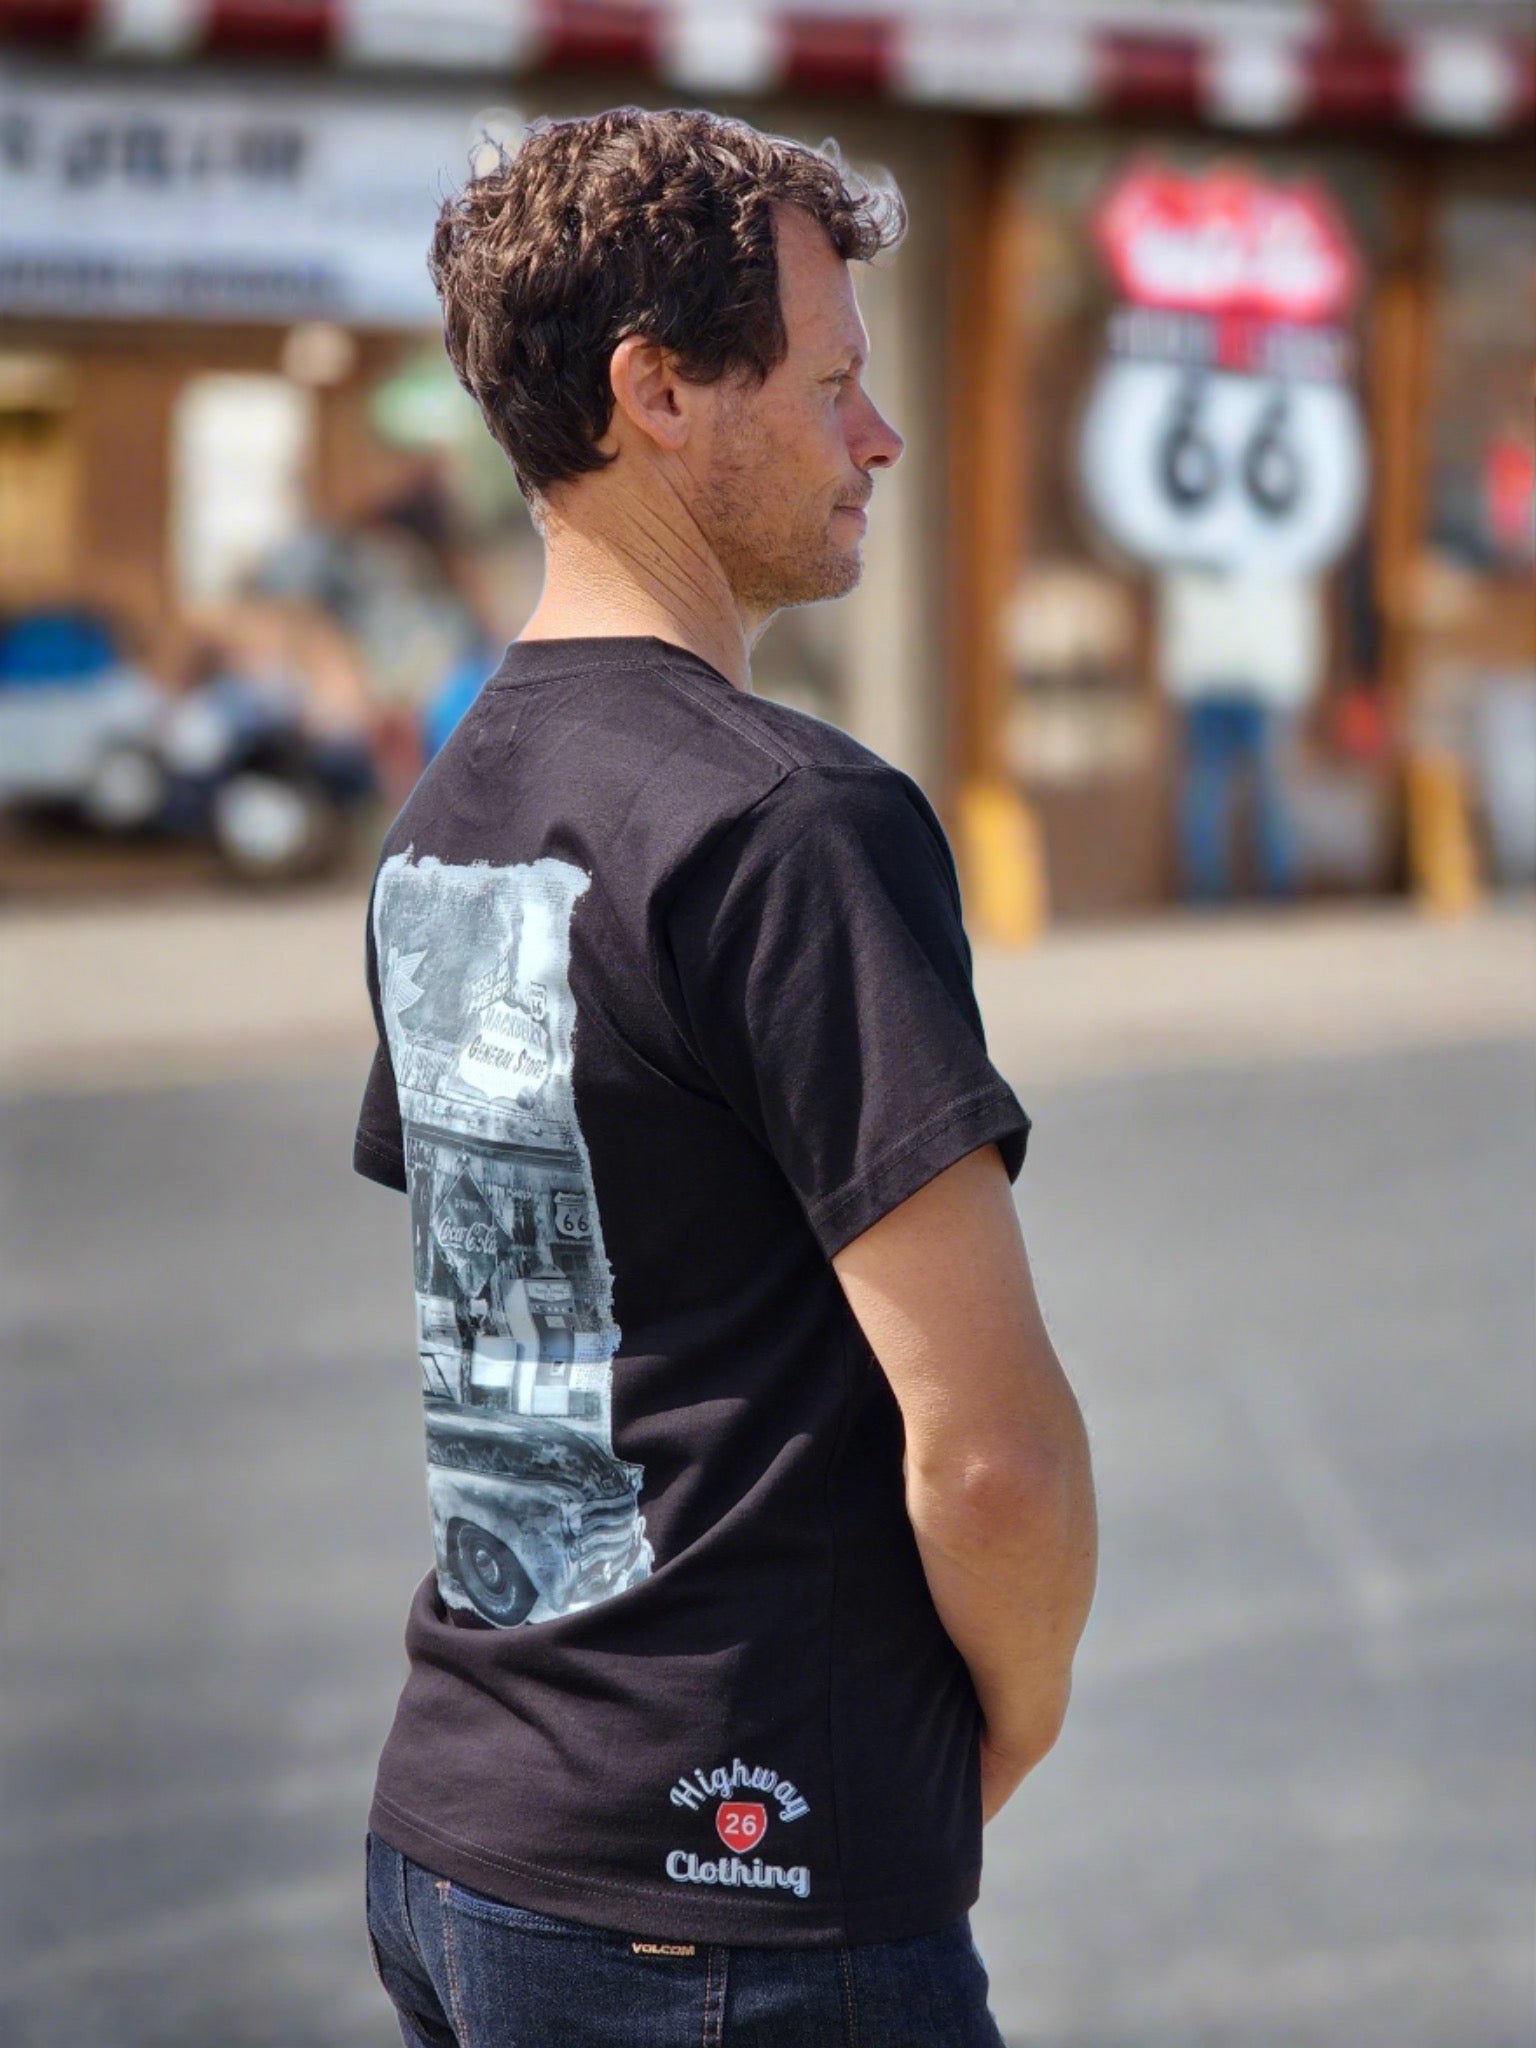 Hackberry Route 66 - Highway 26 Clothing